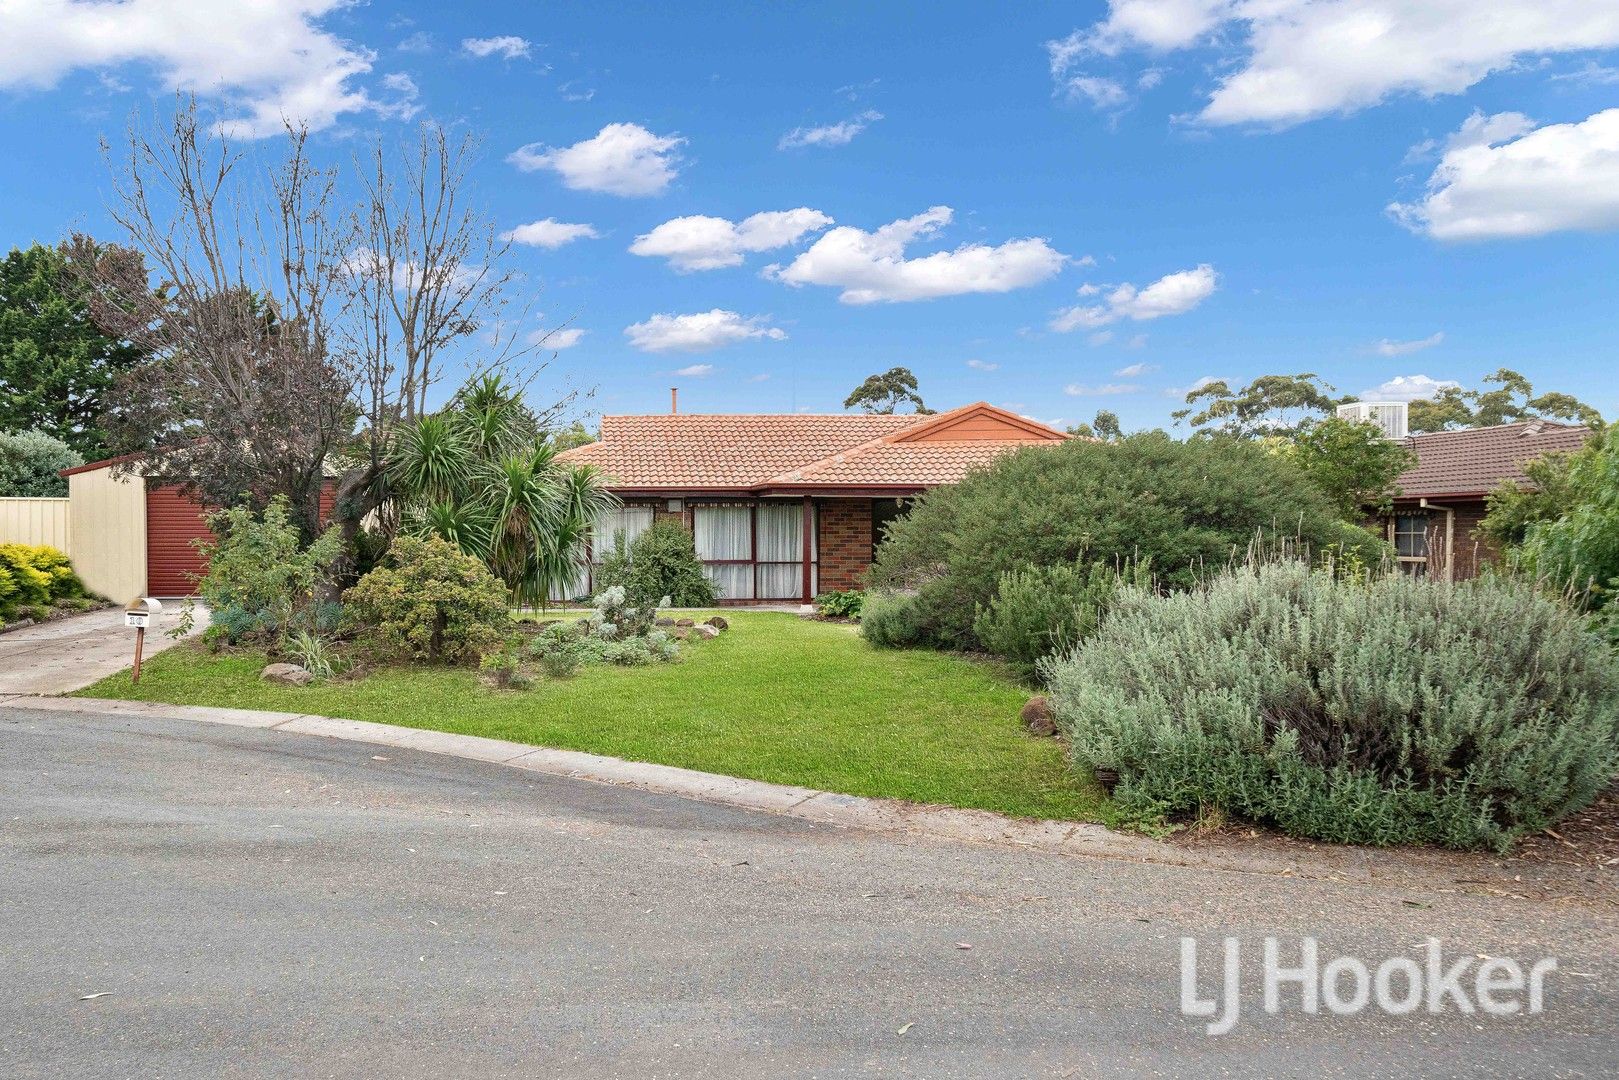 5 bedrooms House in 10 Catalina place MELTON WEST VIC, 3337